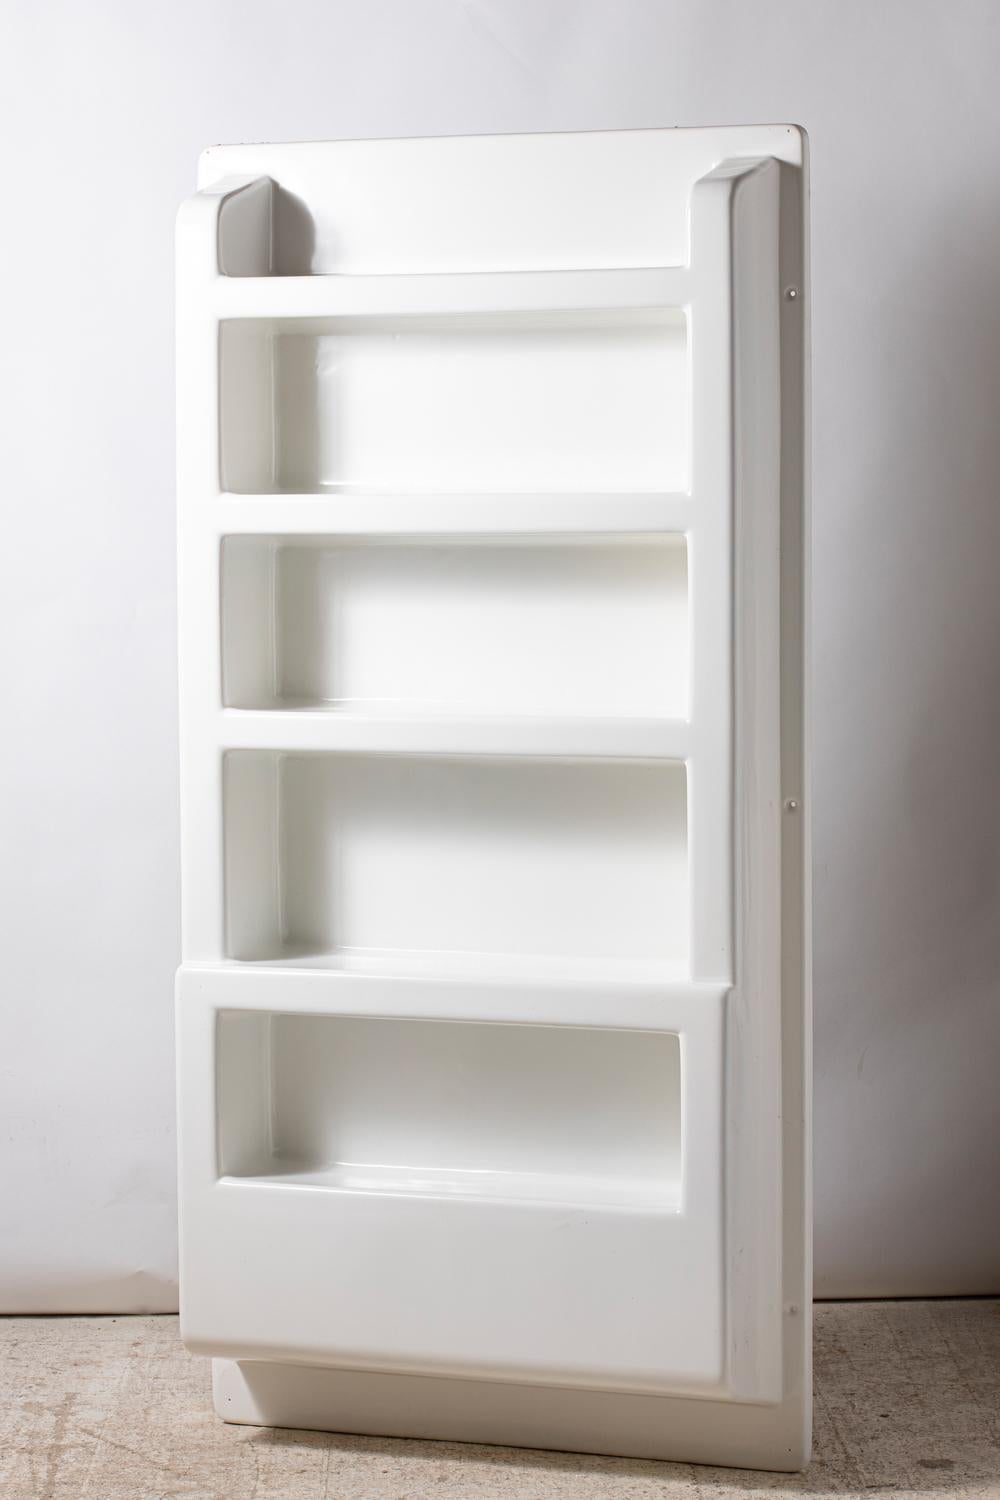 Wall bookcase in white molded propylene. 
Editions Meurop, 1970, France.
Five shelves-compartments on each.
In perfect condition.

Two pieces available.